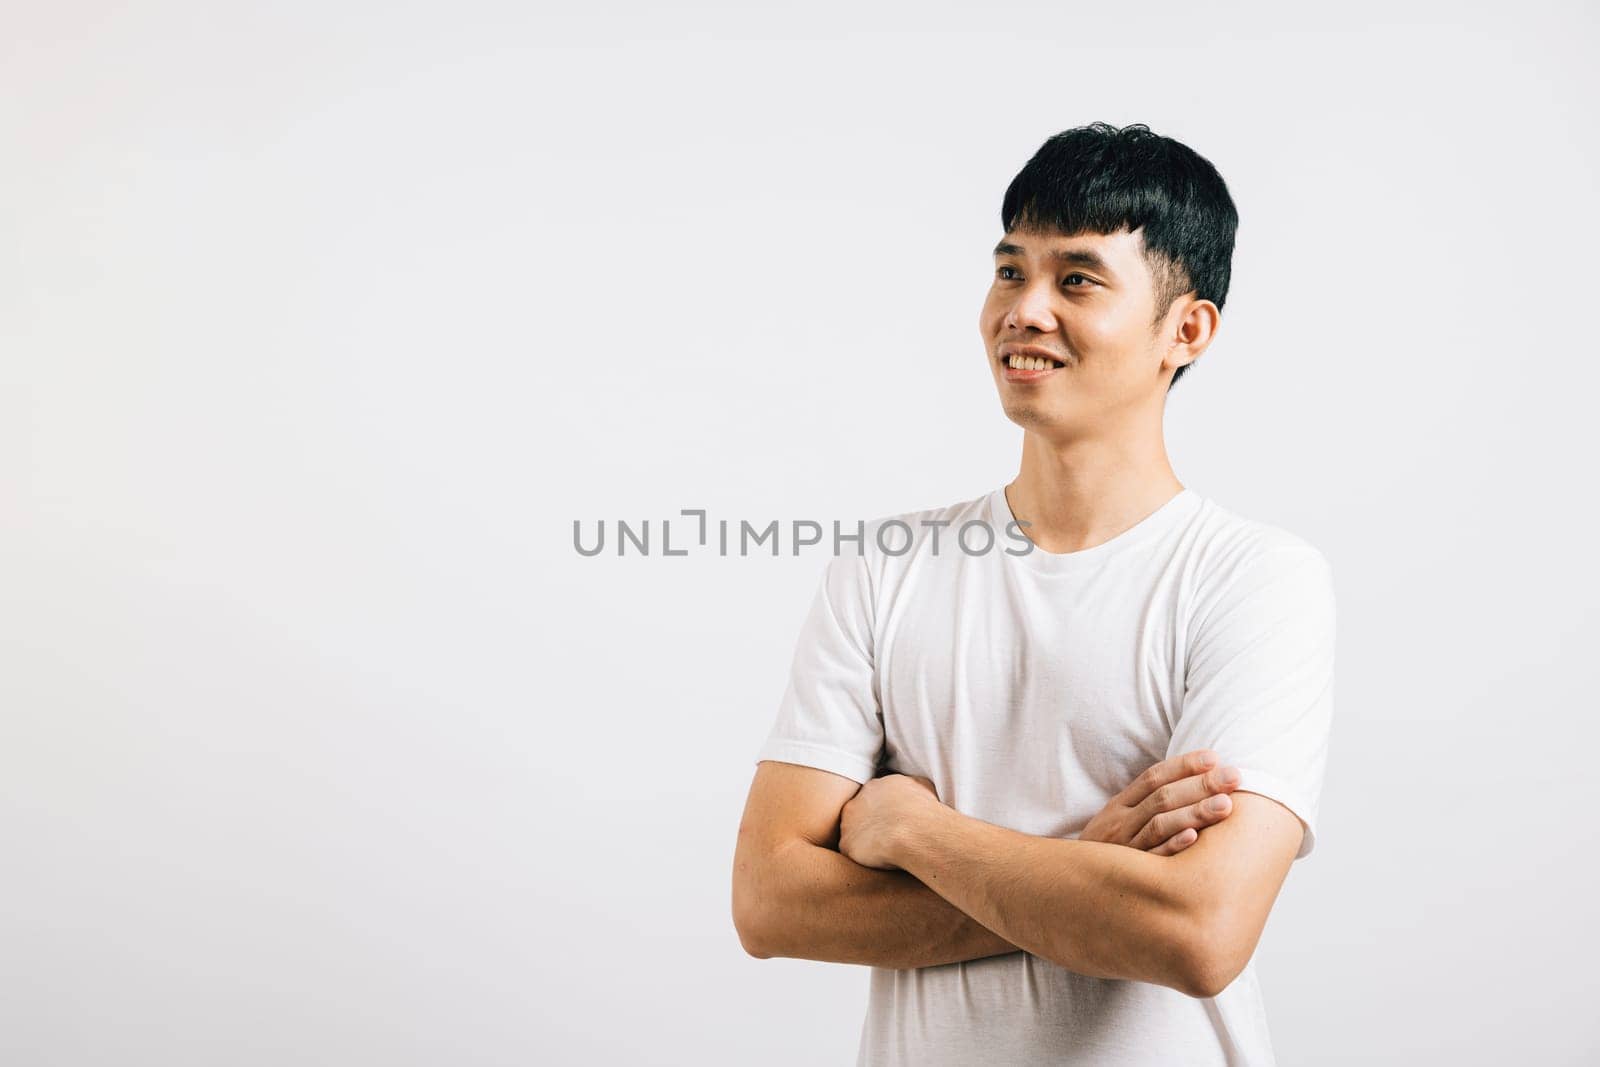 Confident Asian man showcases success with crossed arms and a beaming smile. Studio portrait isolated on white background, radiating positivity and happiness.